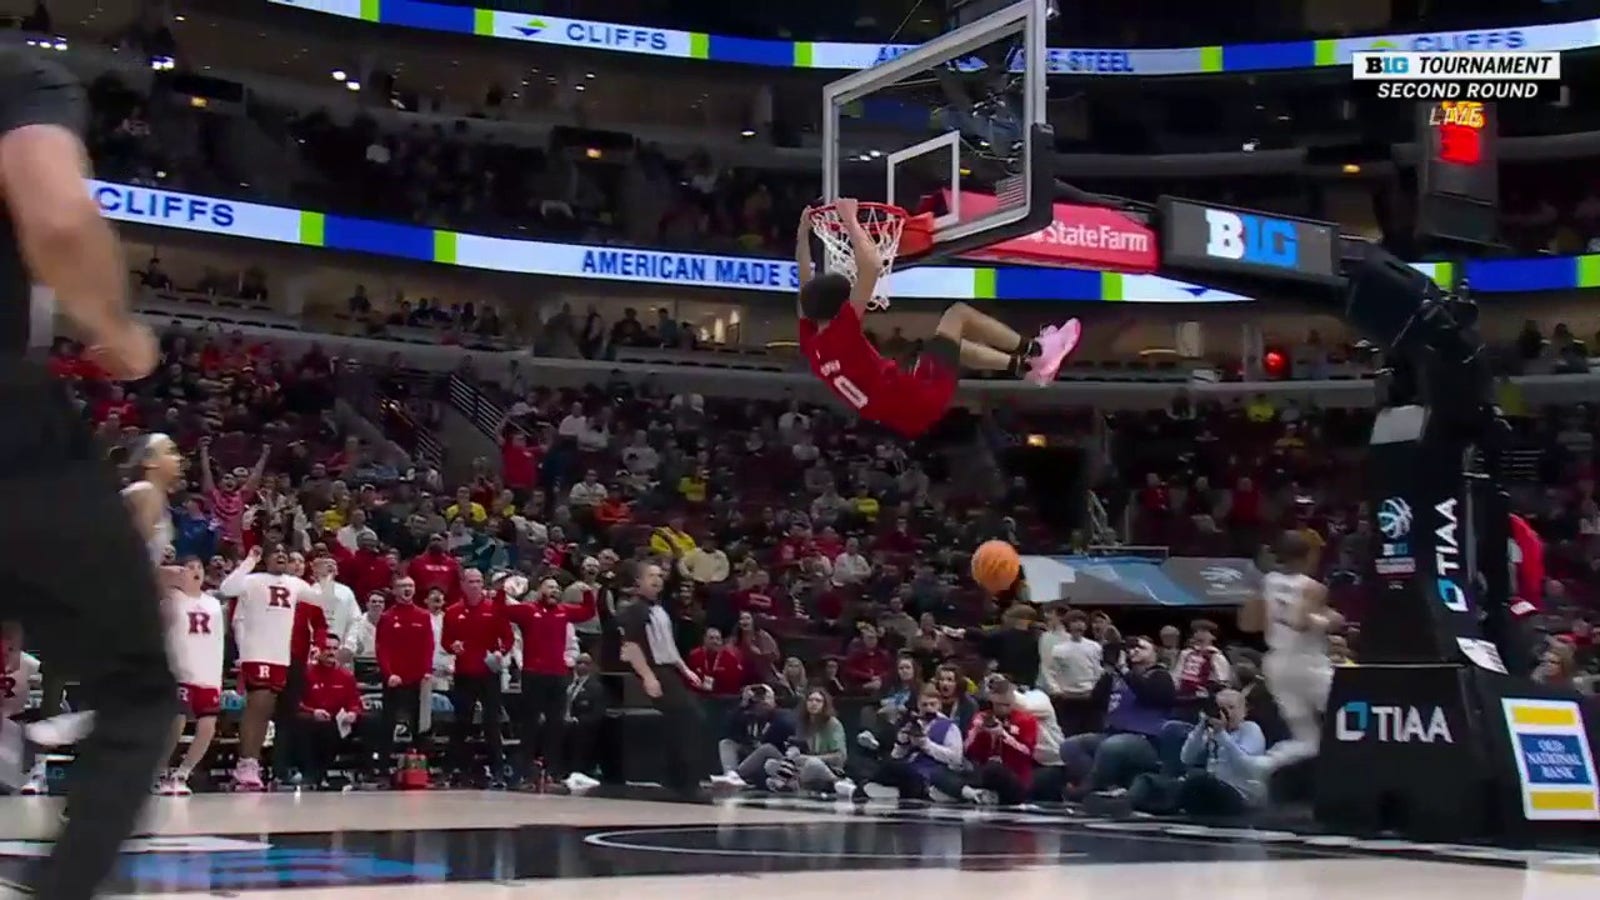 Rutgers' Derek Simpson goes SKY HIGH and delivers a beautiful two-handed dunk against Michigan